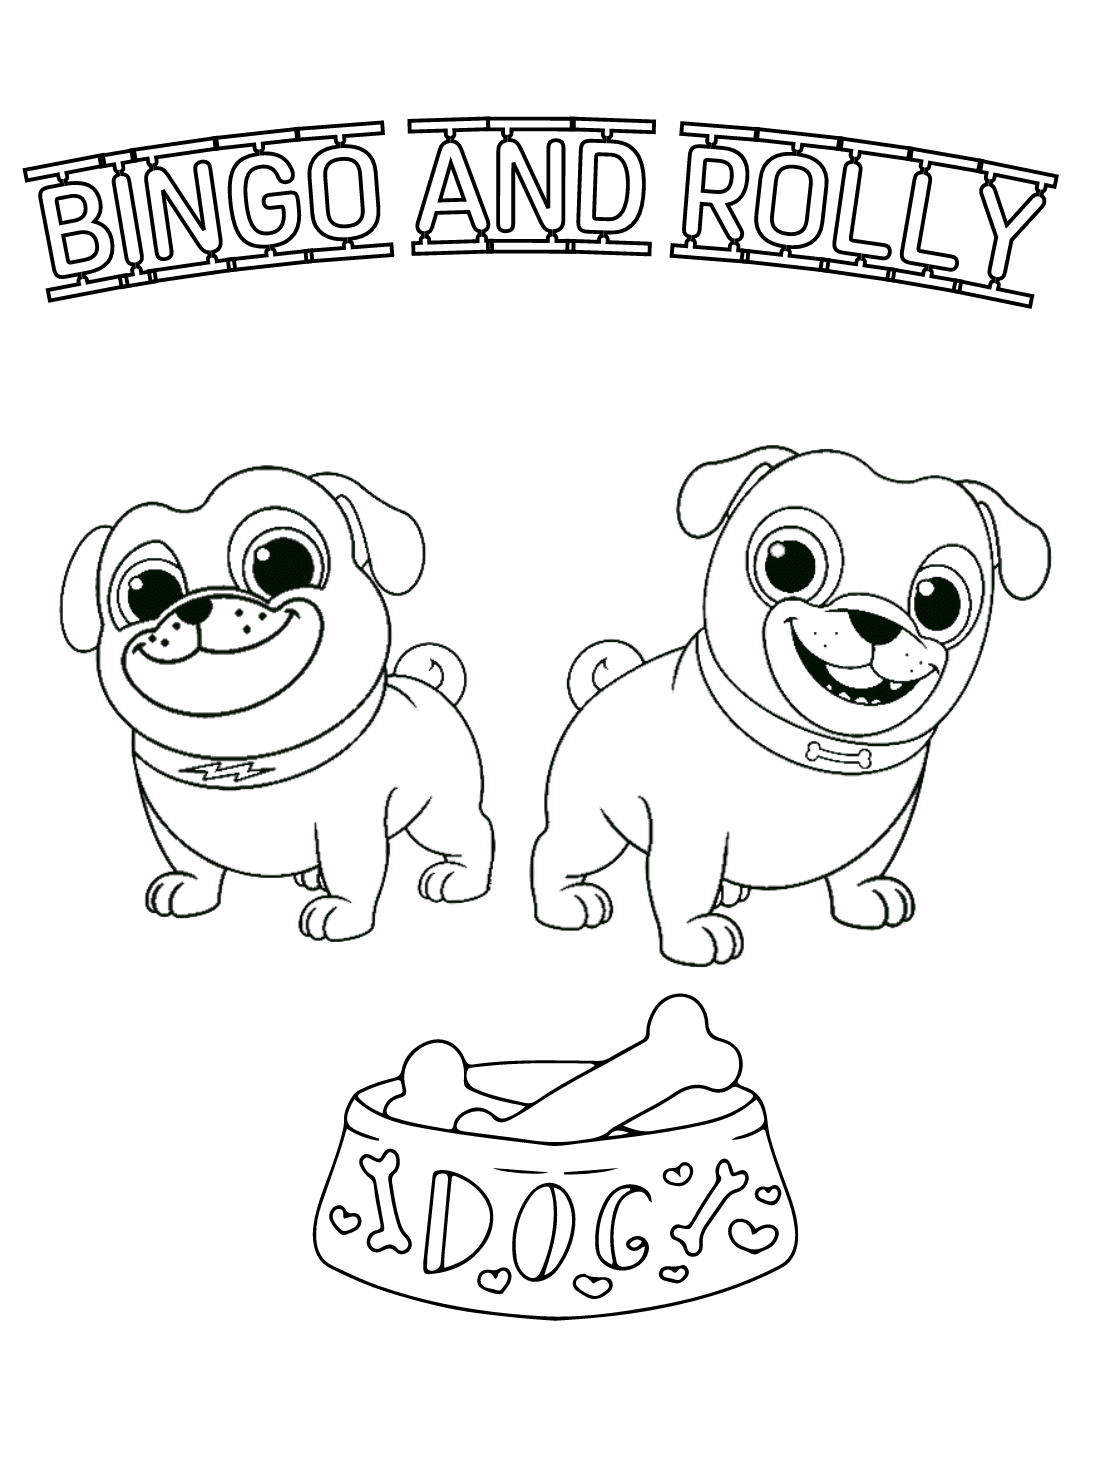 Bingo And Rolly Image For Kids